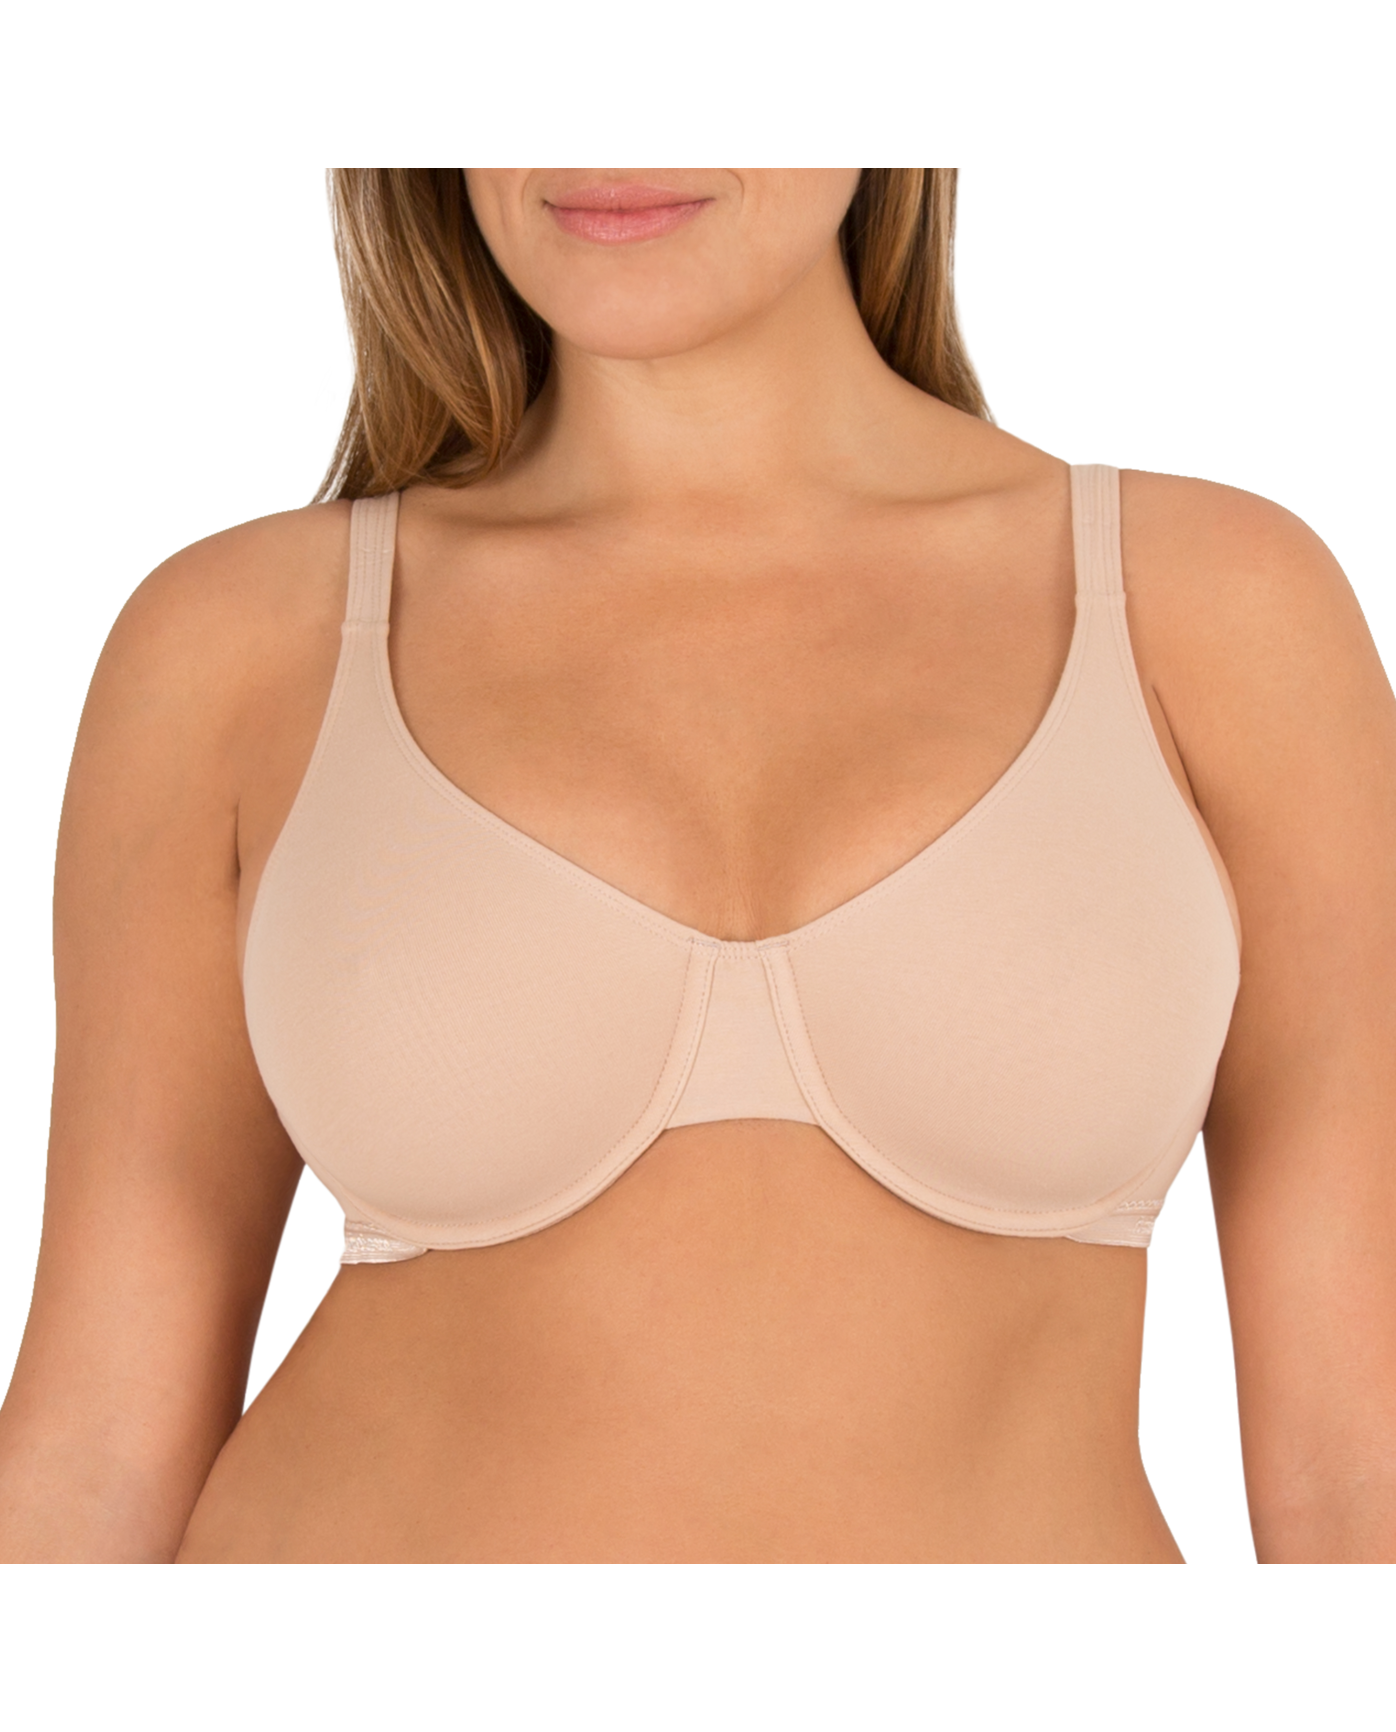 underwear women 36C 38C 40C 42C C Cup Middle aged Women Aunty Bra Non  Padded Cotton Full Cup without underwire Comfortab